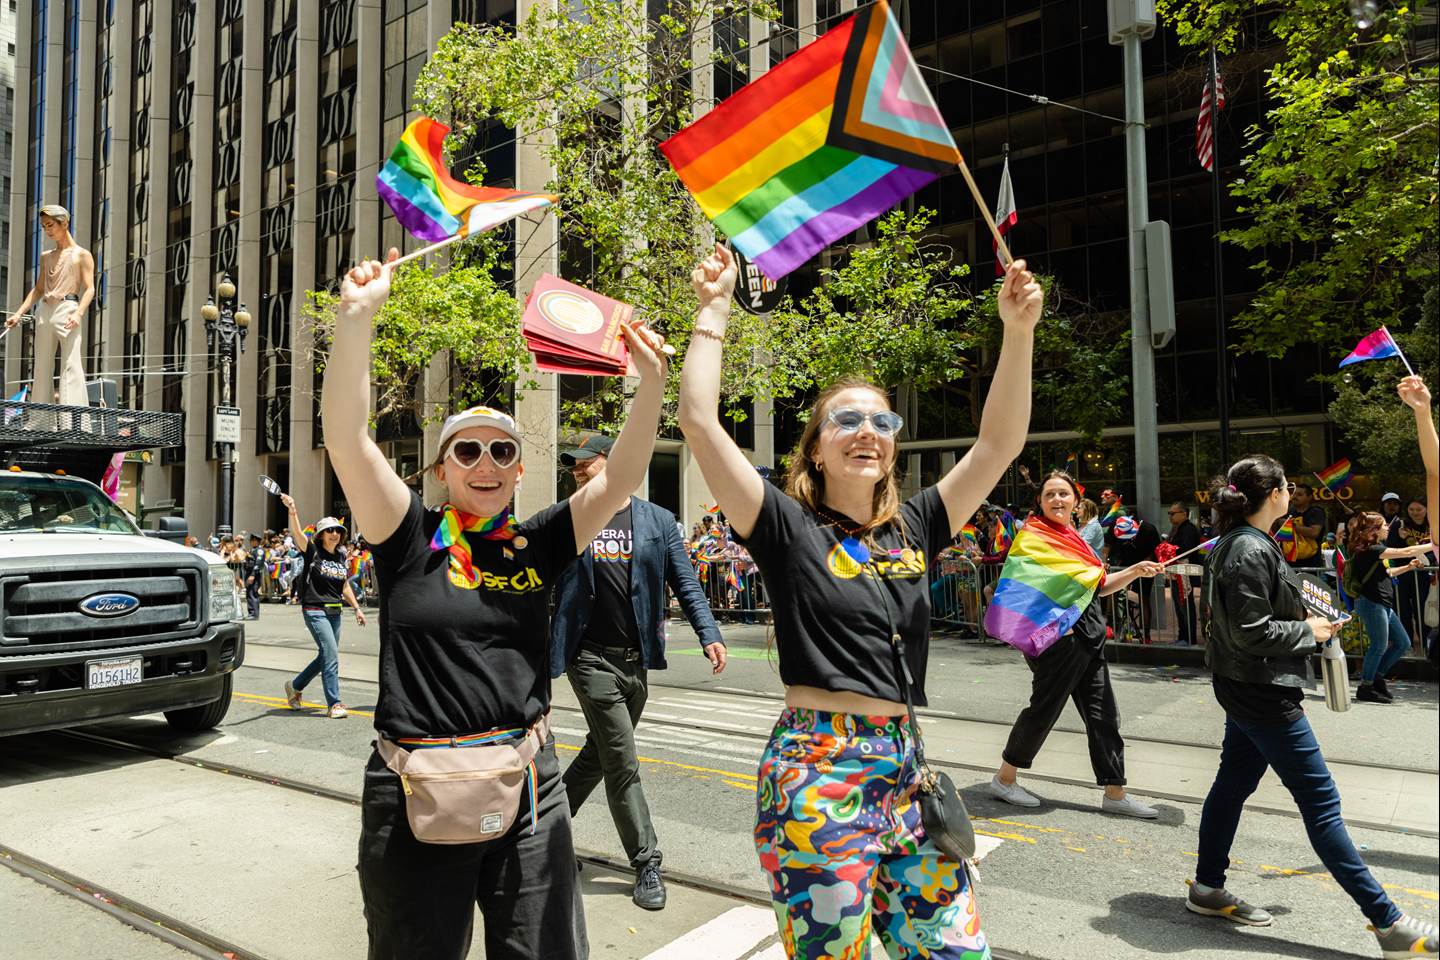 SFO cast members walking in the 2023 Pride Parade waving colorful flags